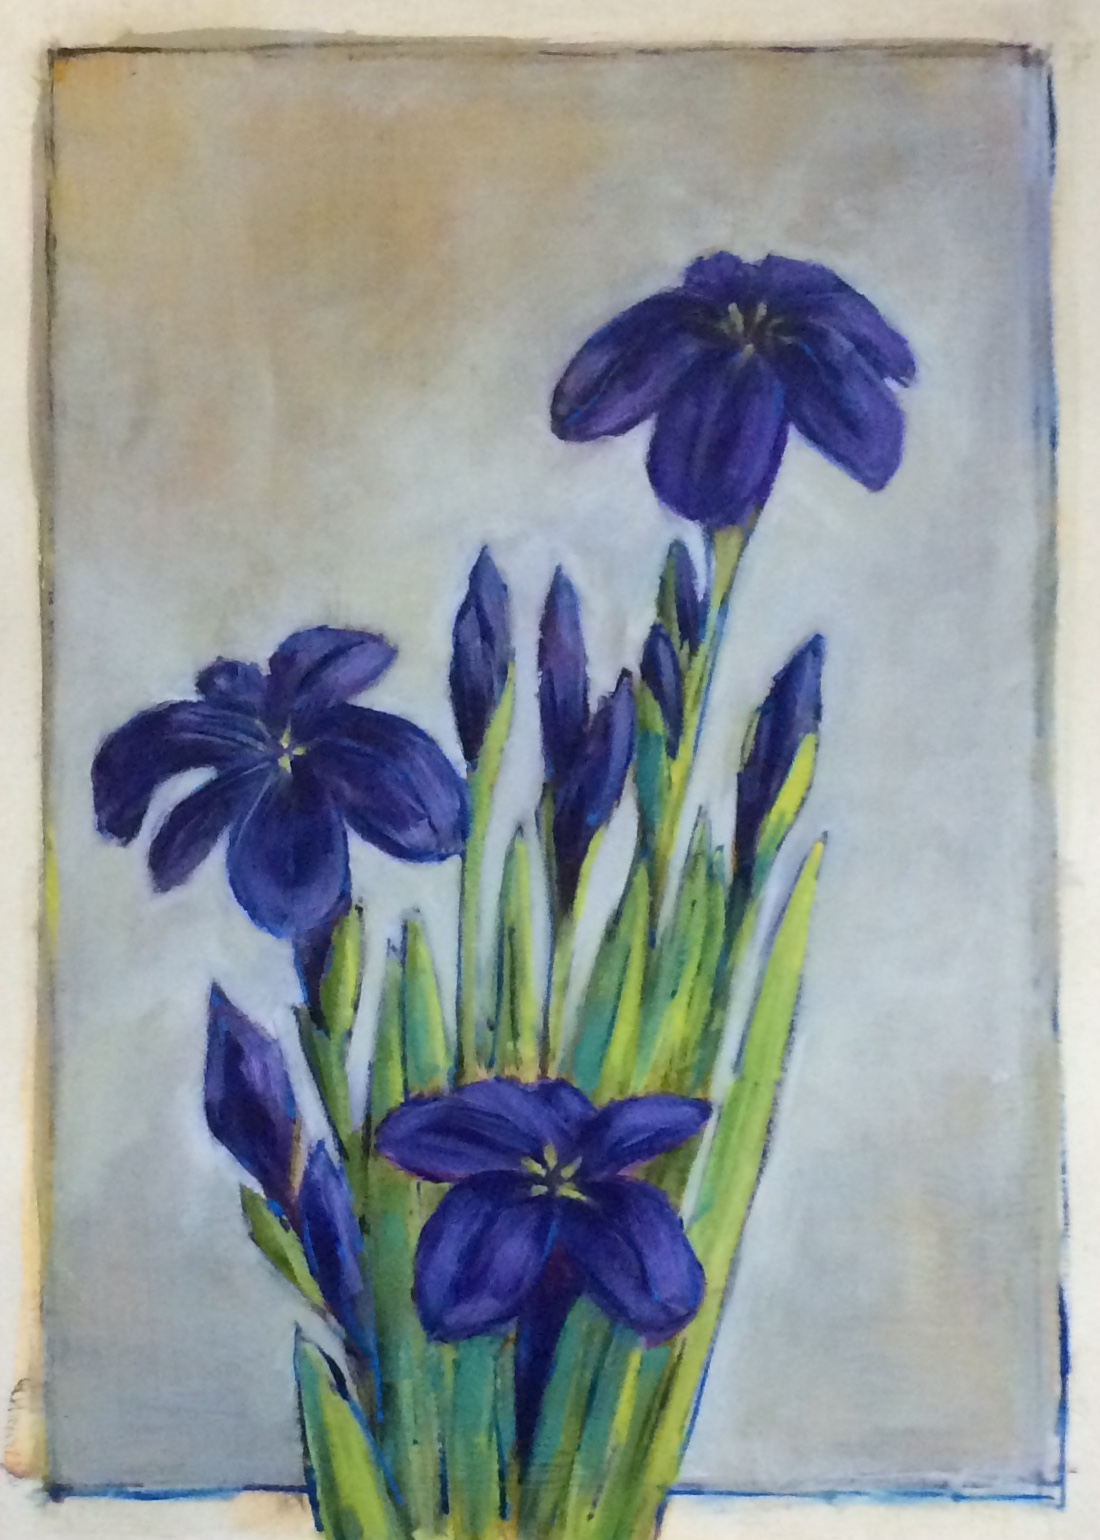 Japanese Iris II. Oil on primed Arches, 16 by 20 inches, 2014